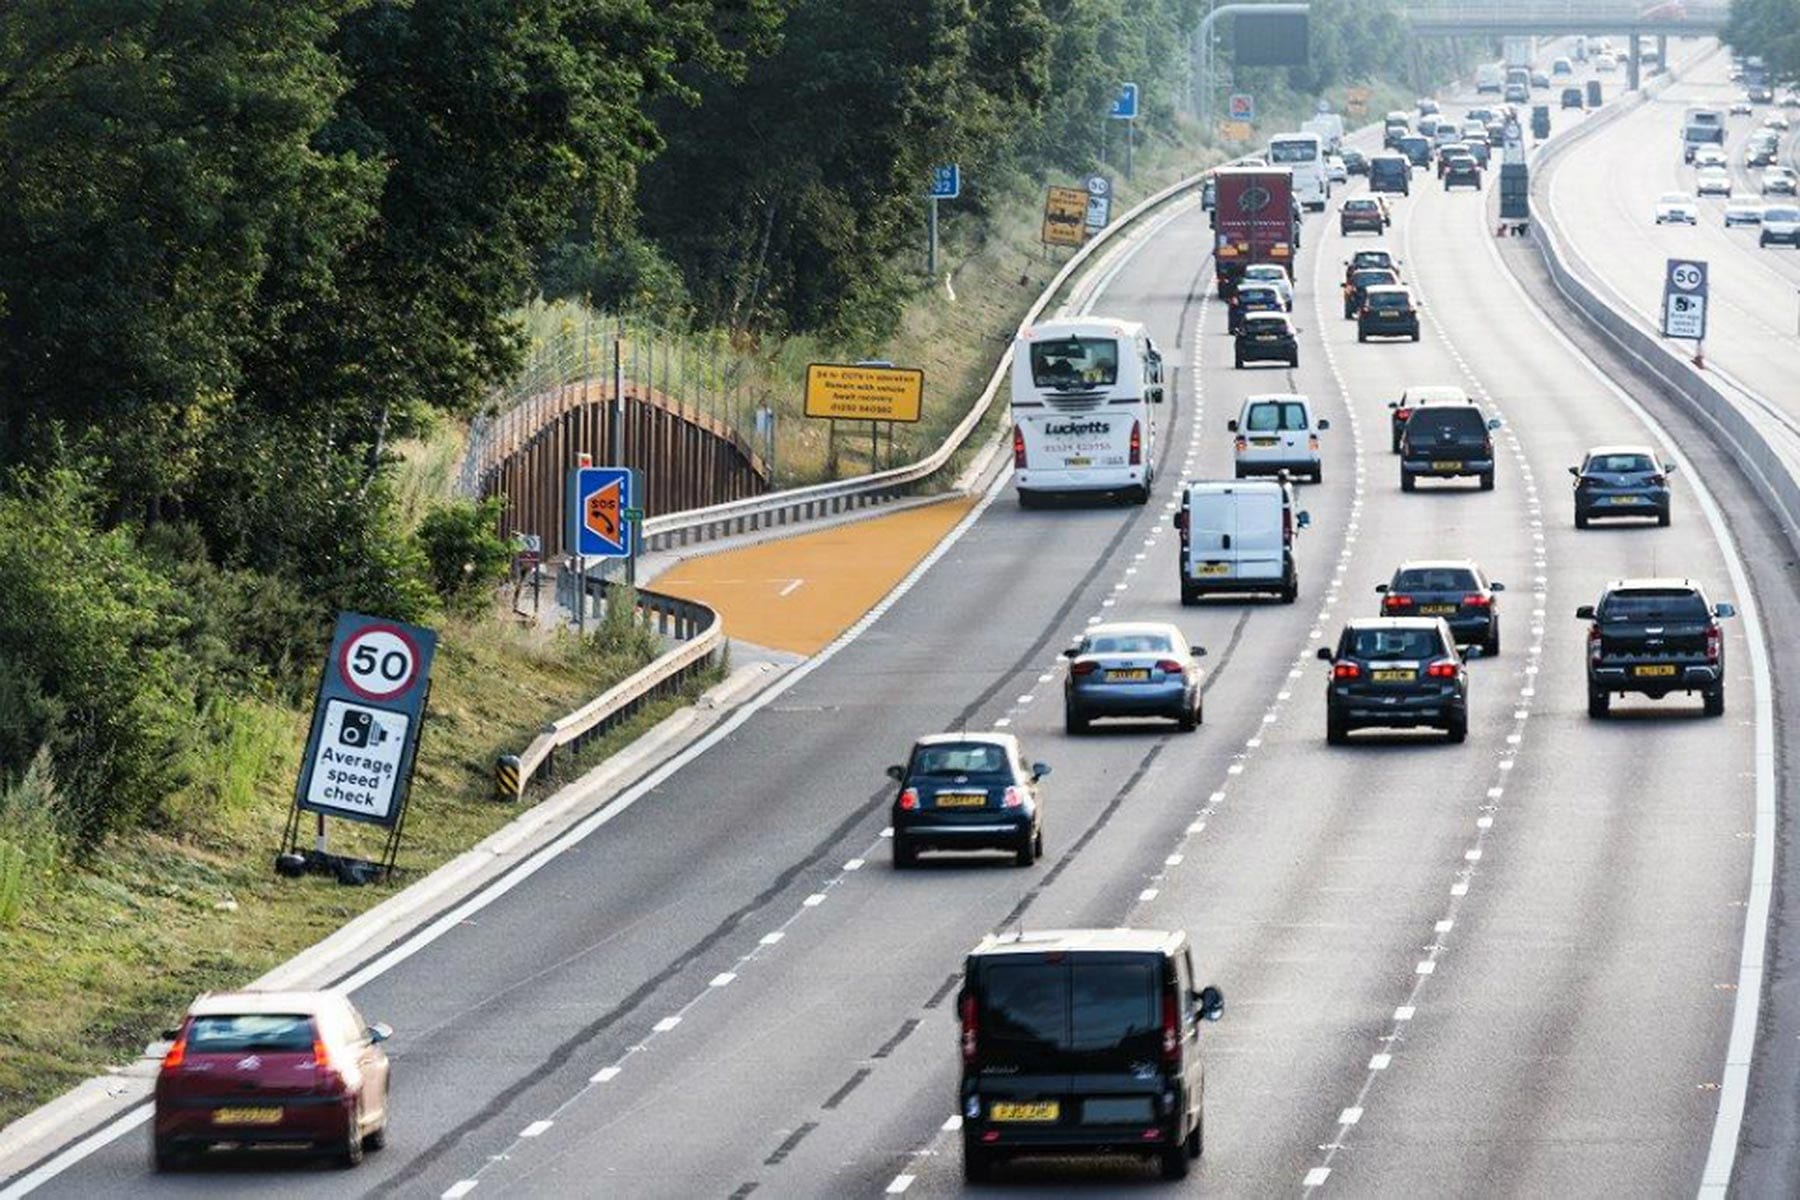 Smart motorways – why so long for recognition?